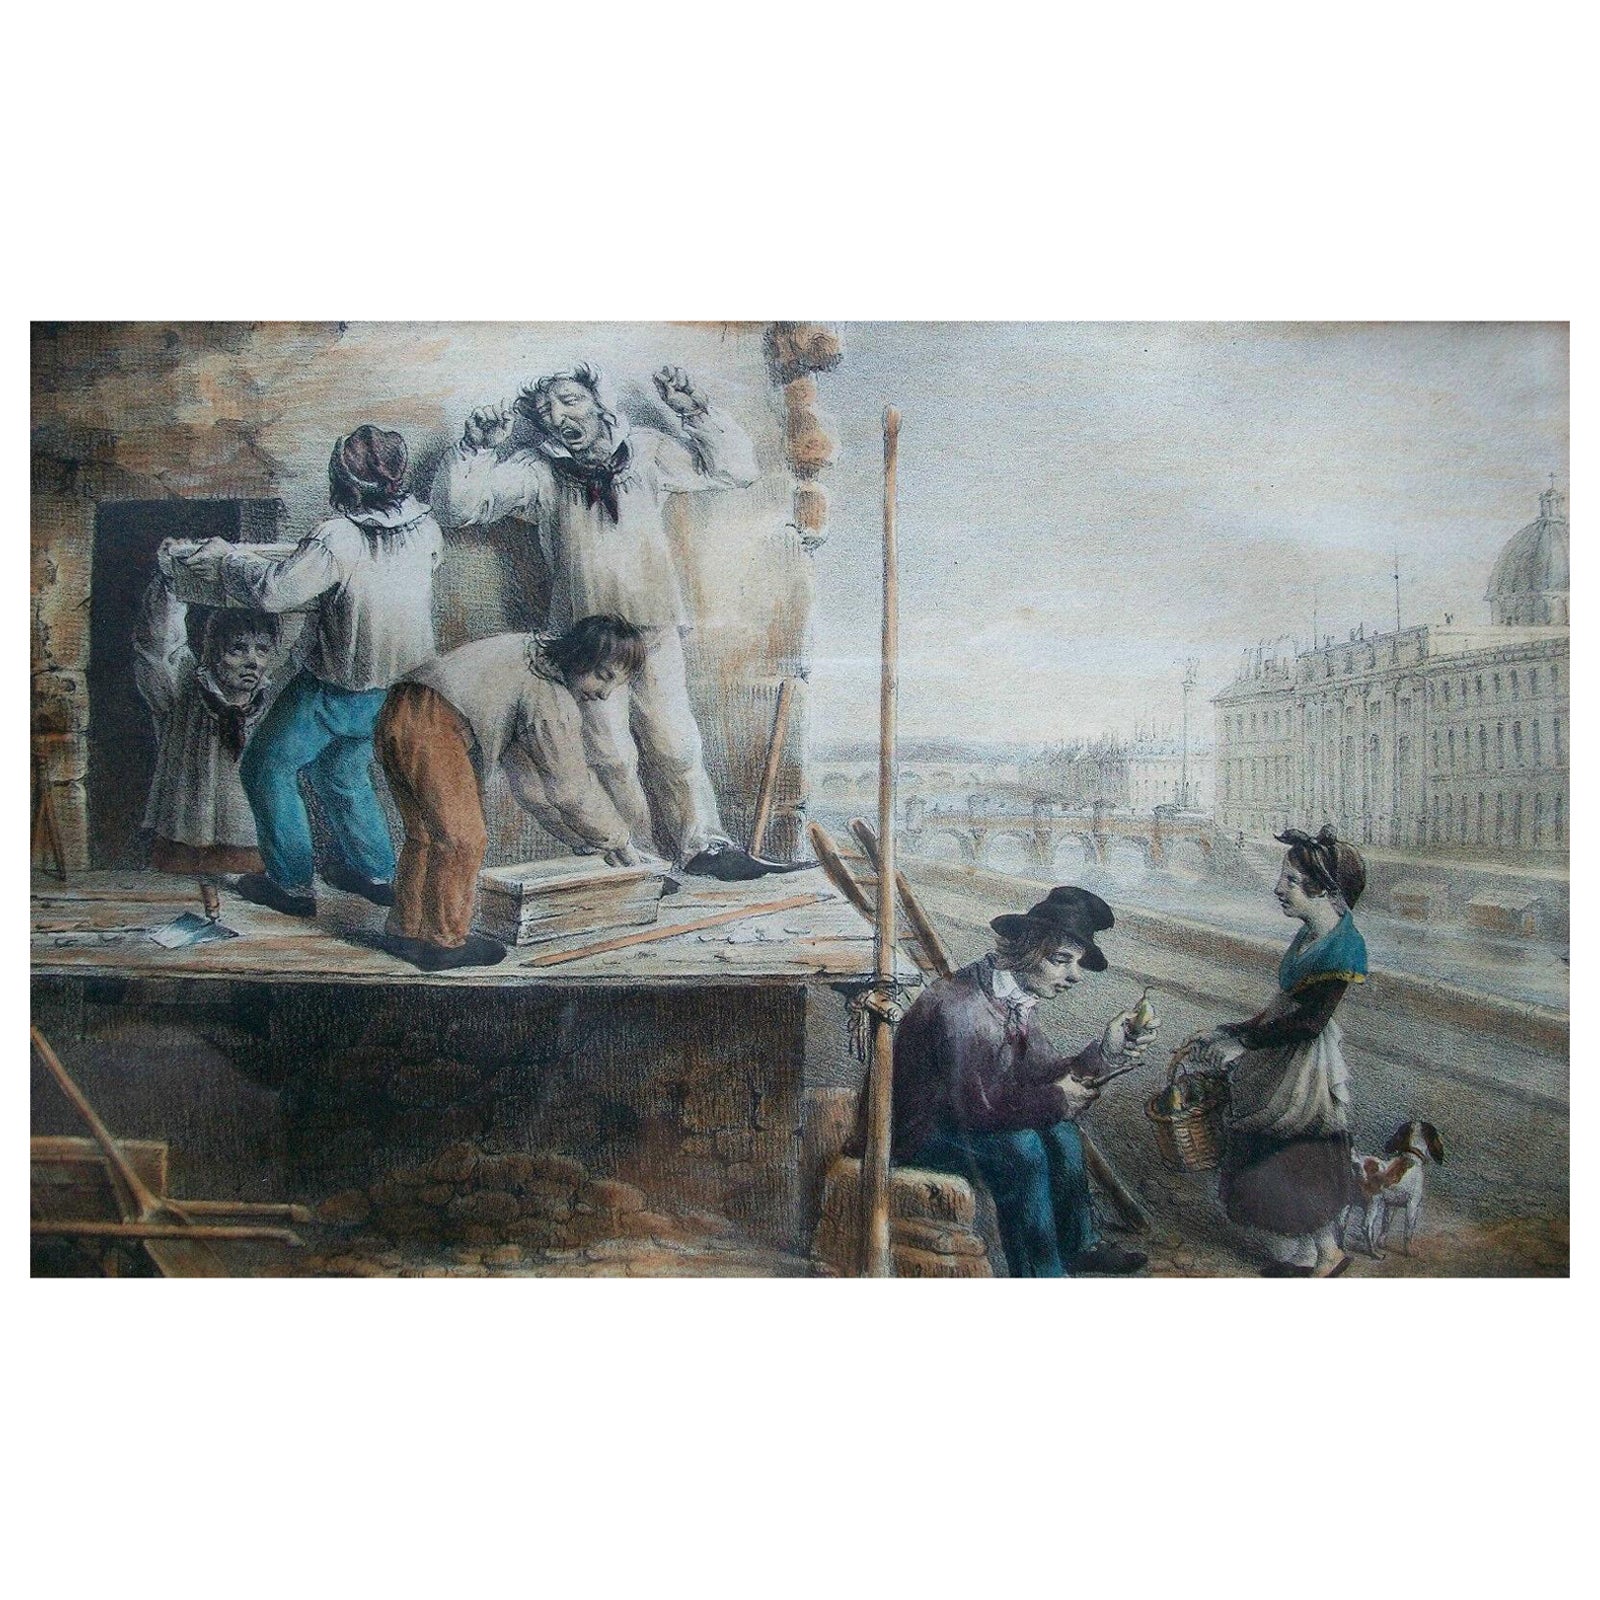 Antique Hand Colored Engraving - 'London Street Urchins' - U. K., circa 1880 For Sale